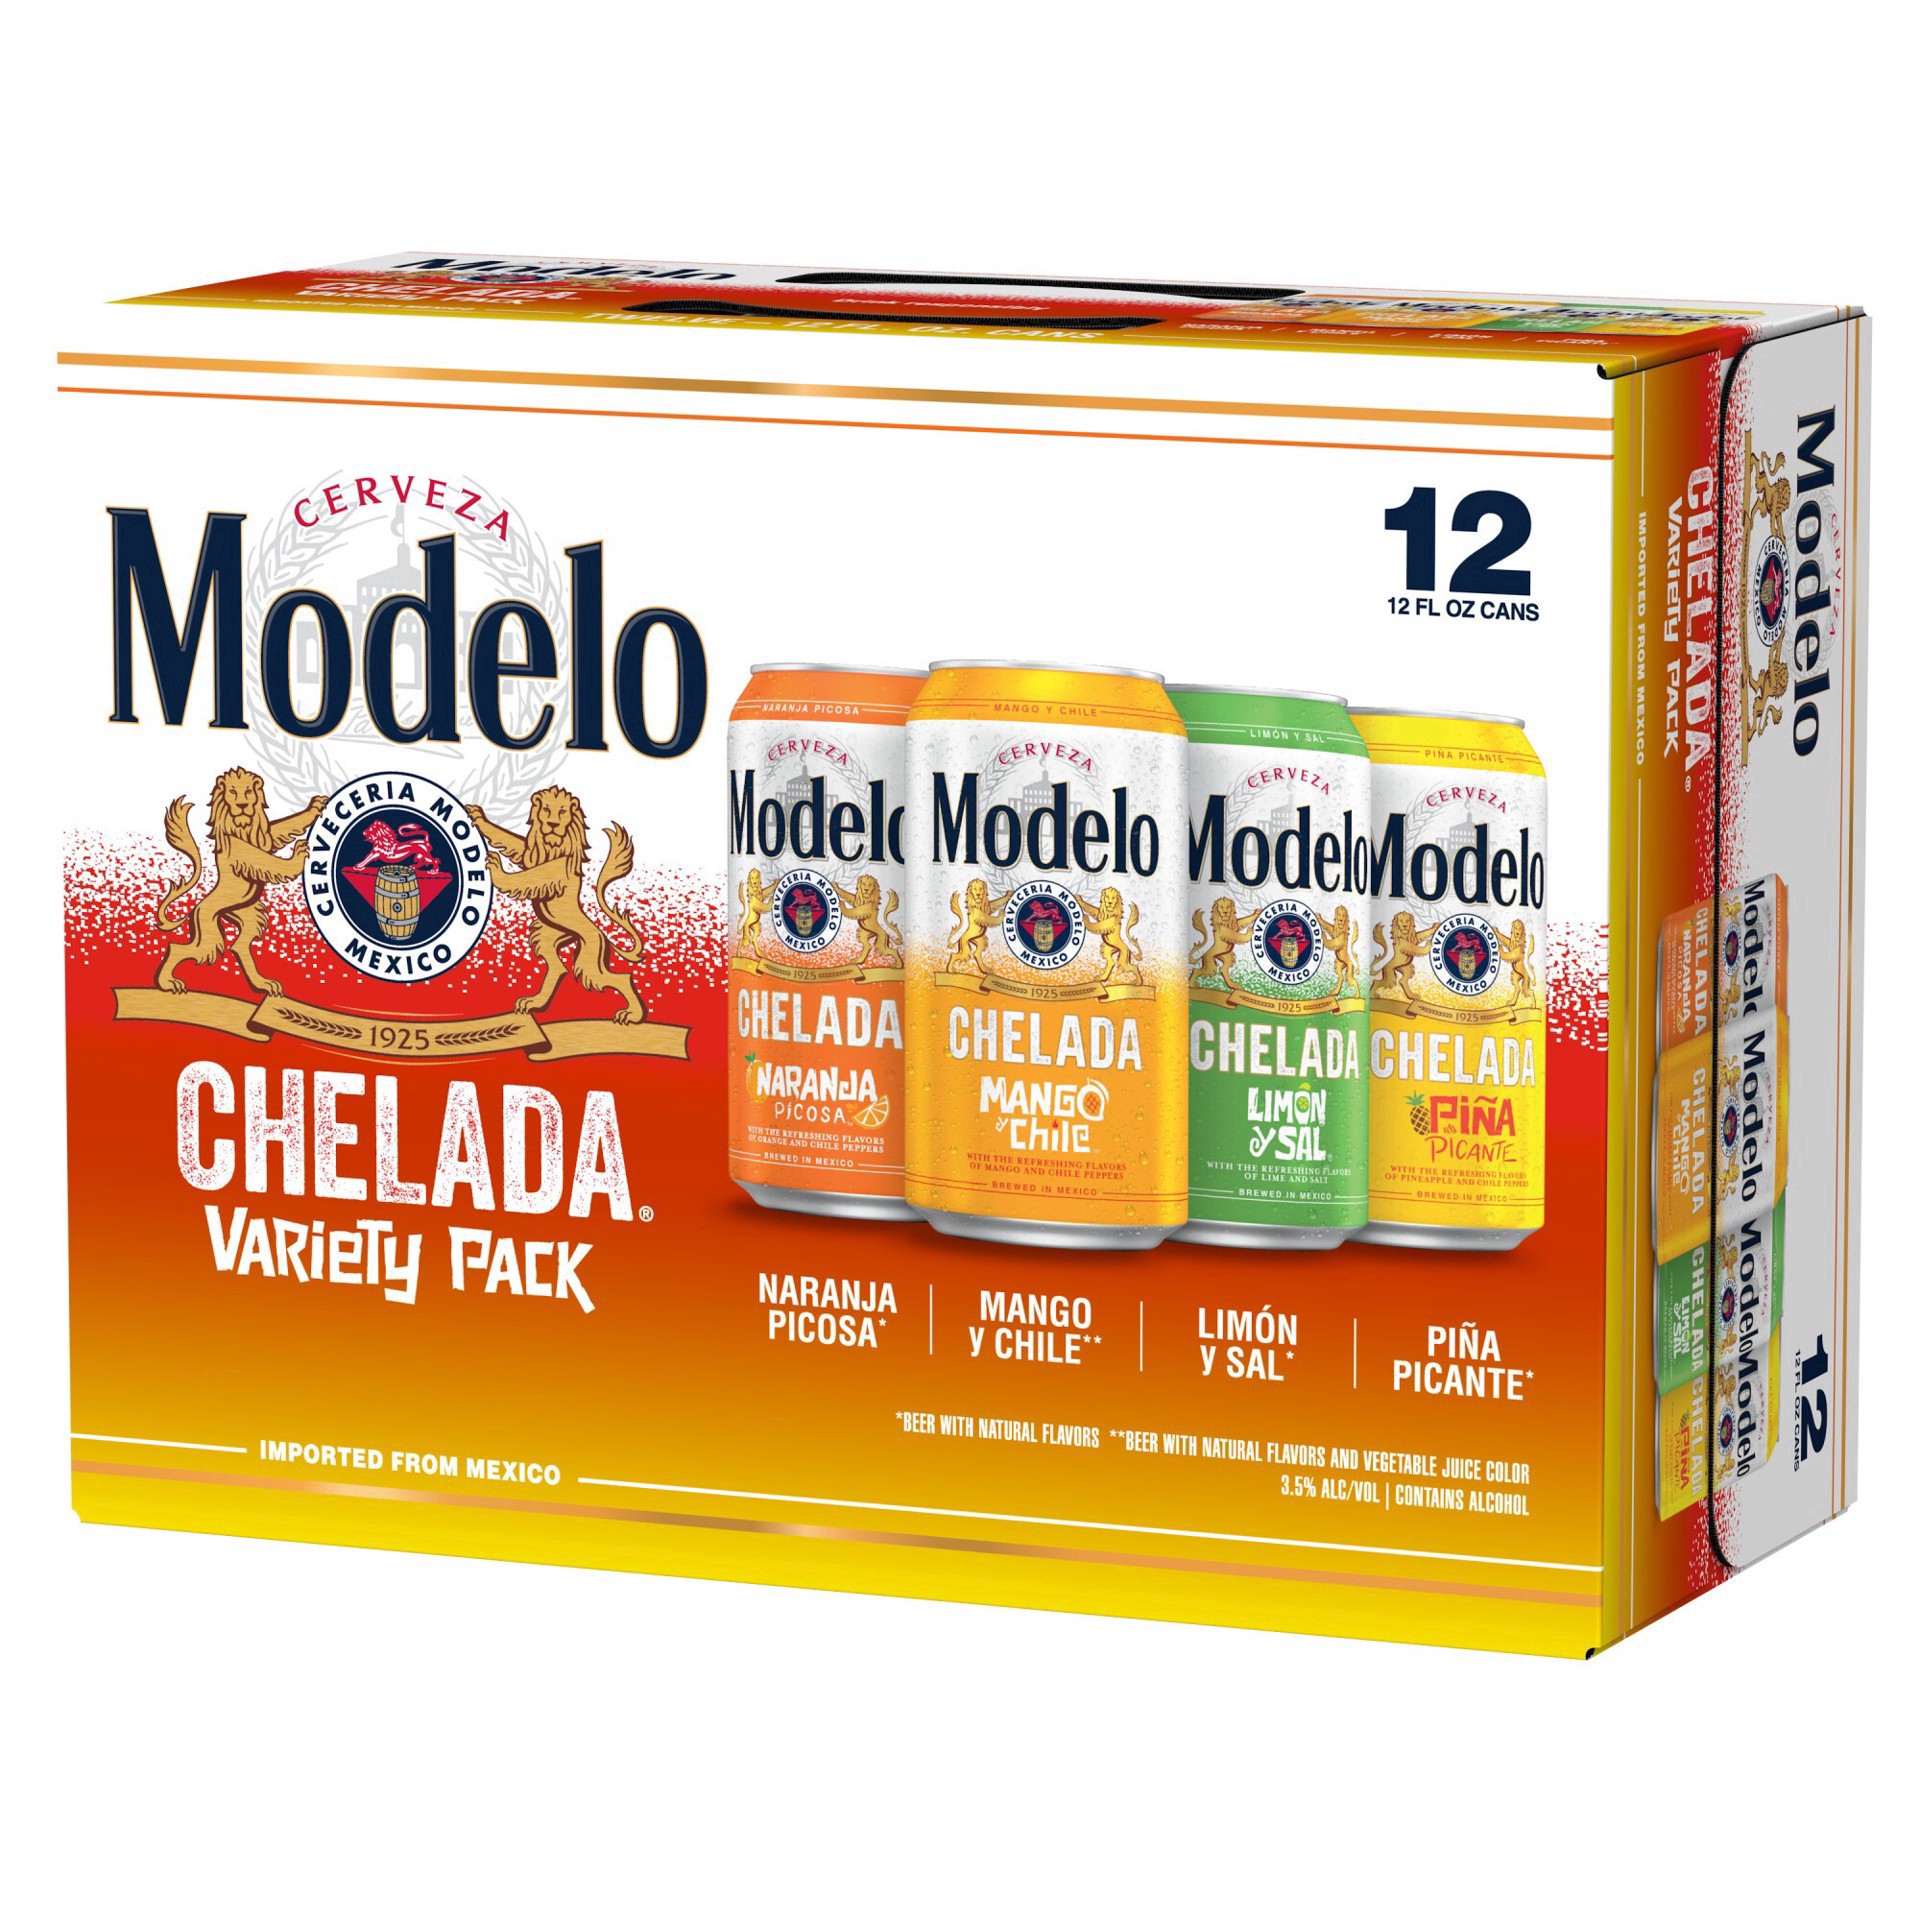 slide 11 of 11, Modelo Chelada Variety Pack Mexican Import Flavored Beer, 12 pk 12 fl oz Cans, 3.5% ABV, 144 fl oz